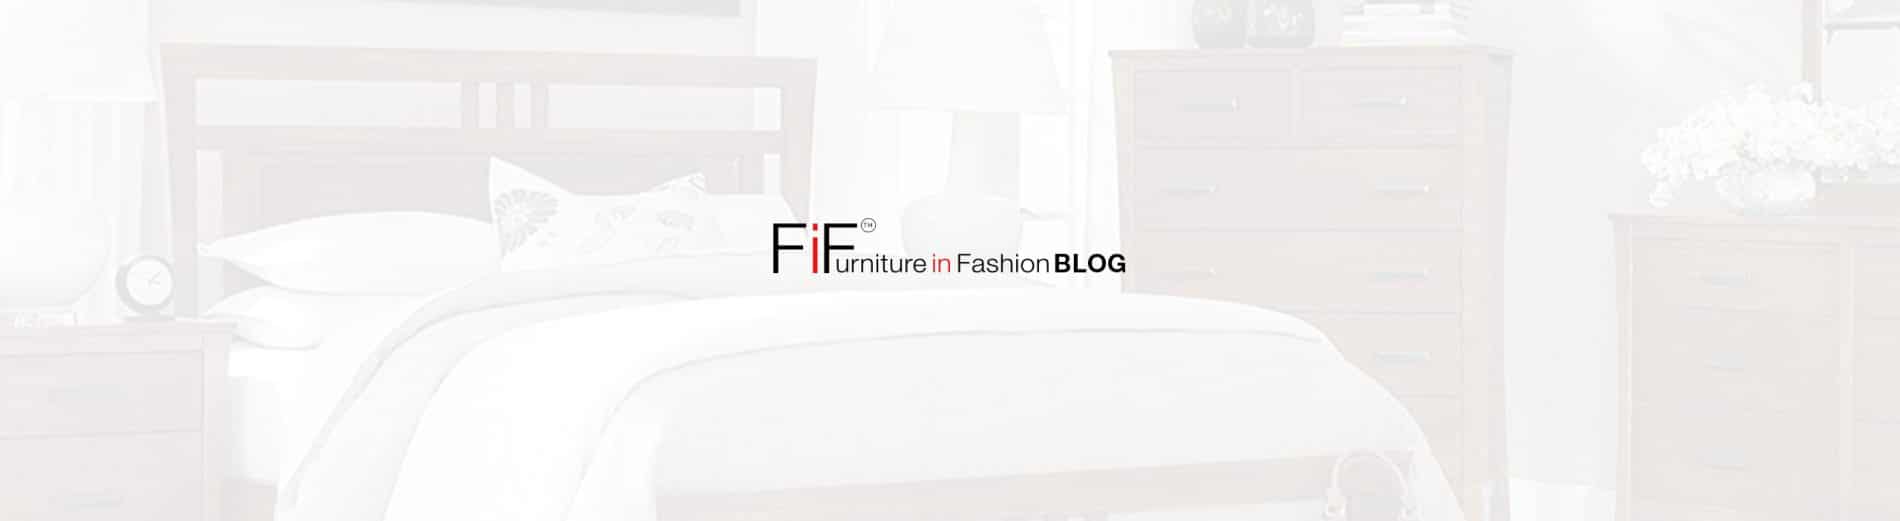 Go For An Exclusive Look Furniture